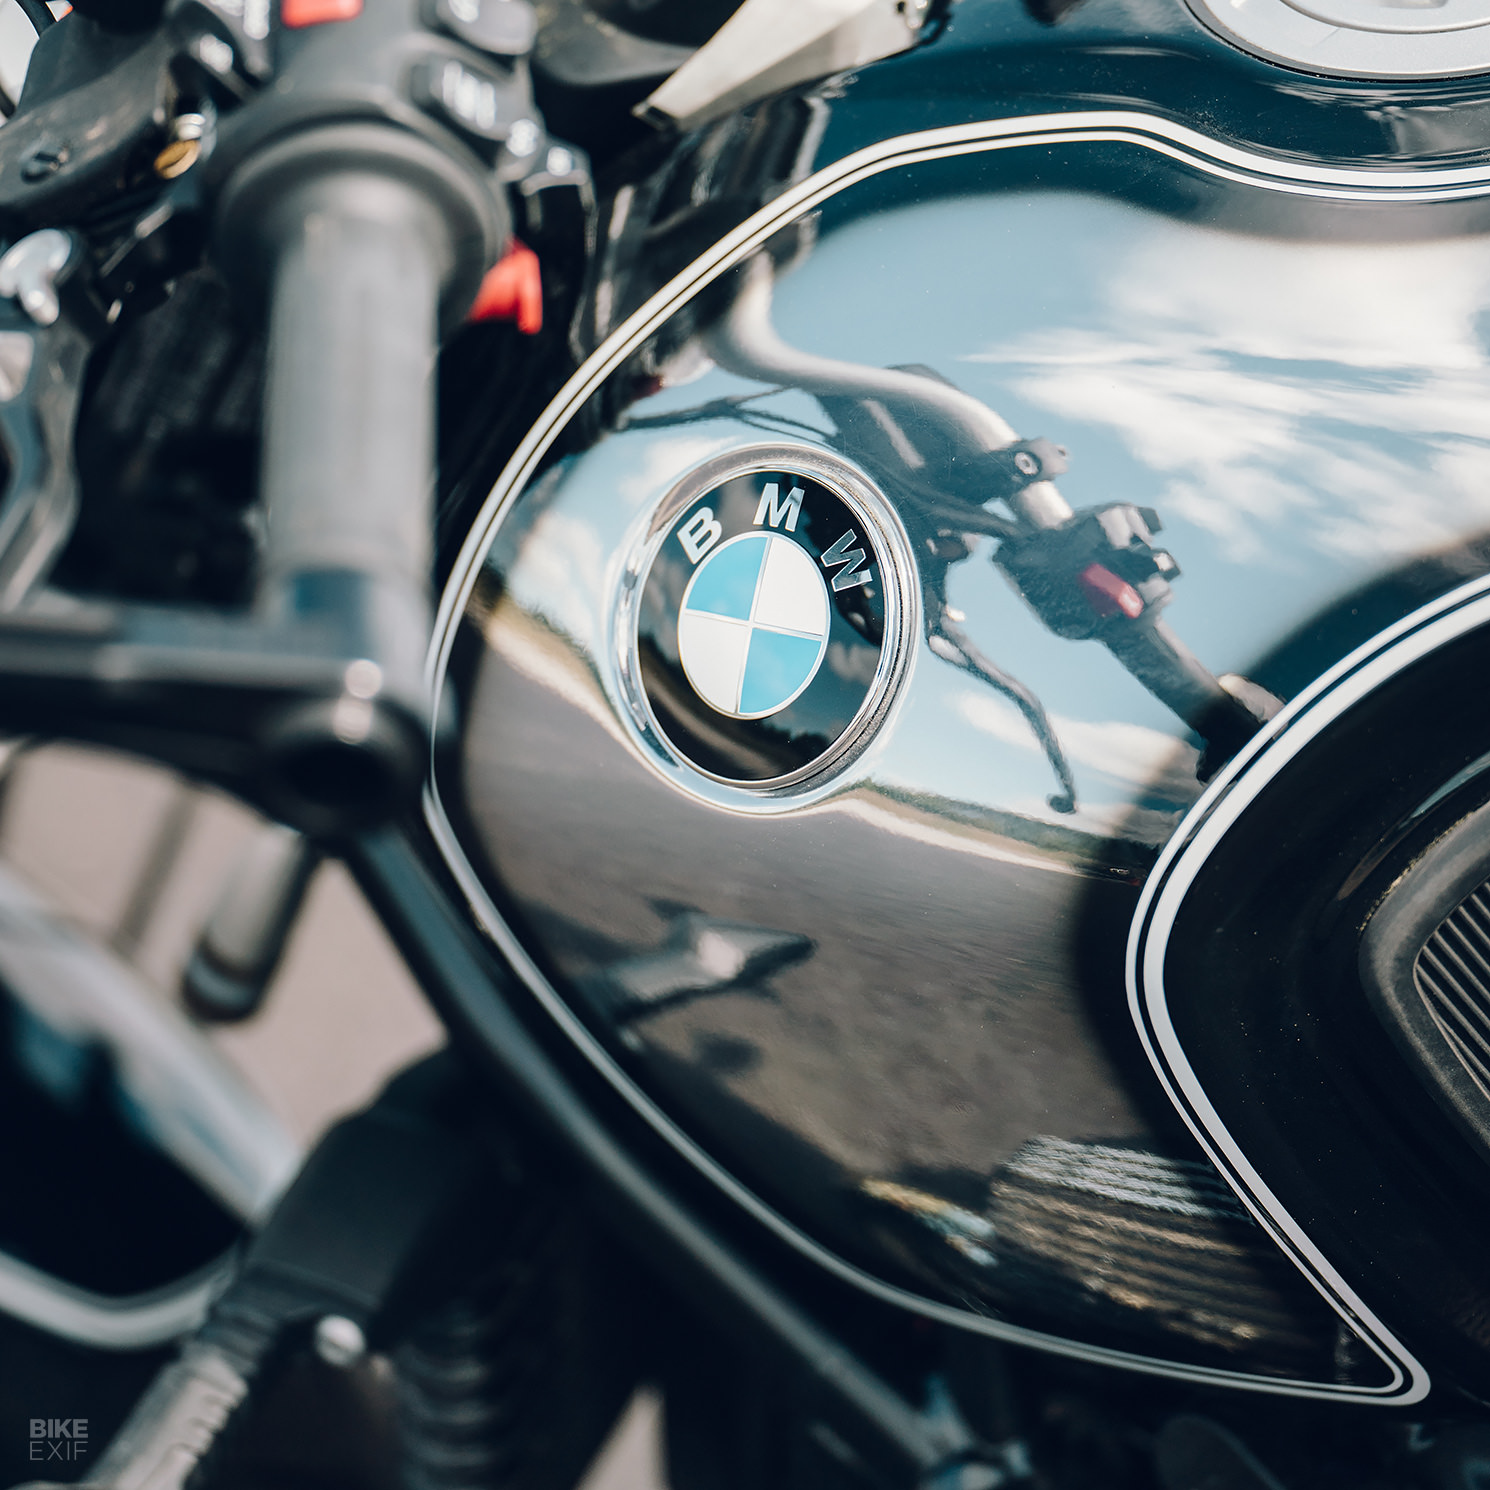 100+] Bmw Logo Pictures